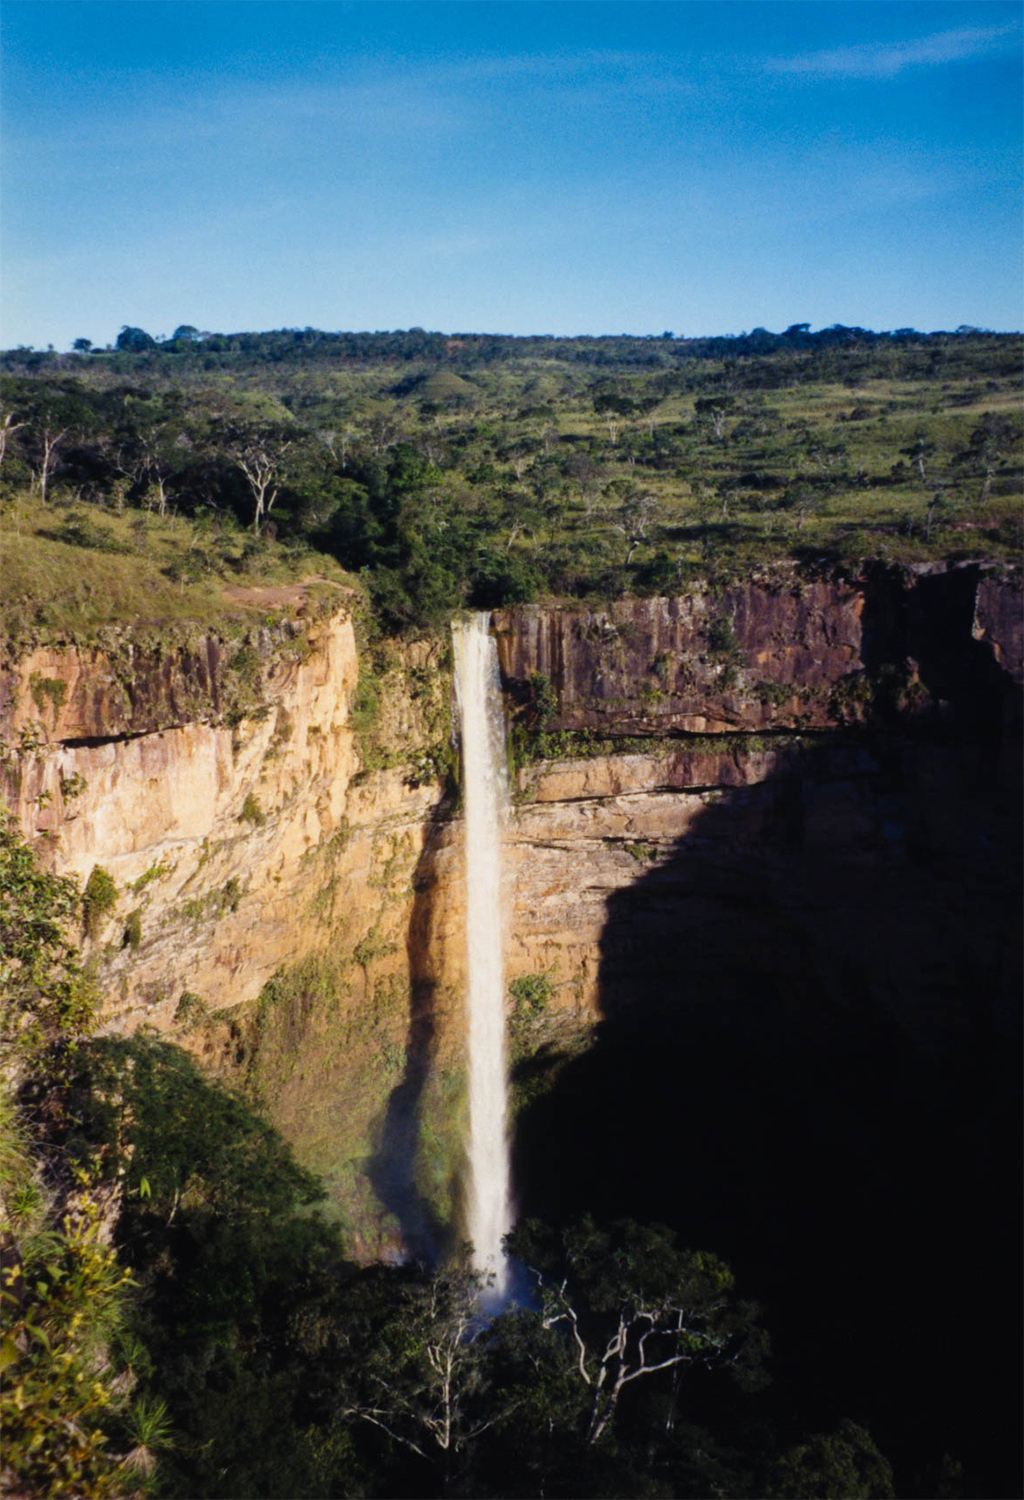 <p>The spectacular Véu da Noiva (Bridal Veil) waterfall in the Chapada dos Guimarães National Park. The falls drop a dramatic 86 metres into a perfect pool...</p>